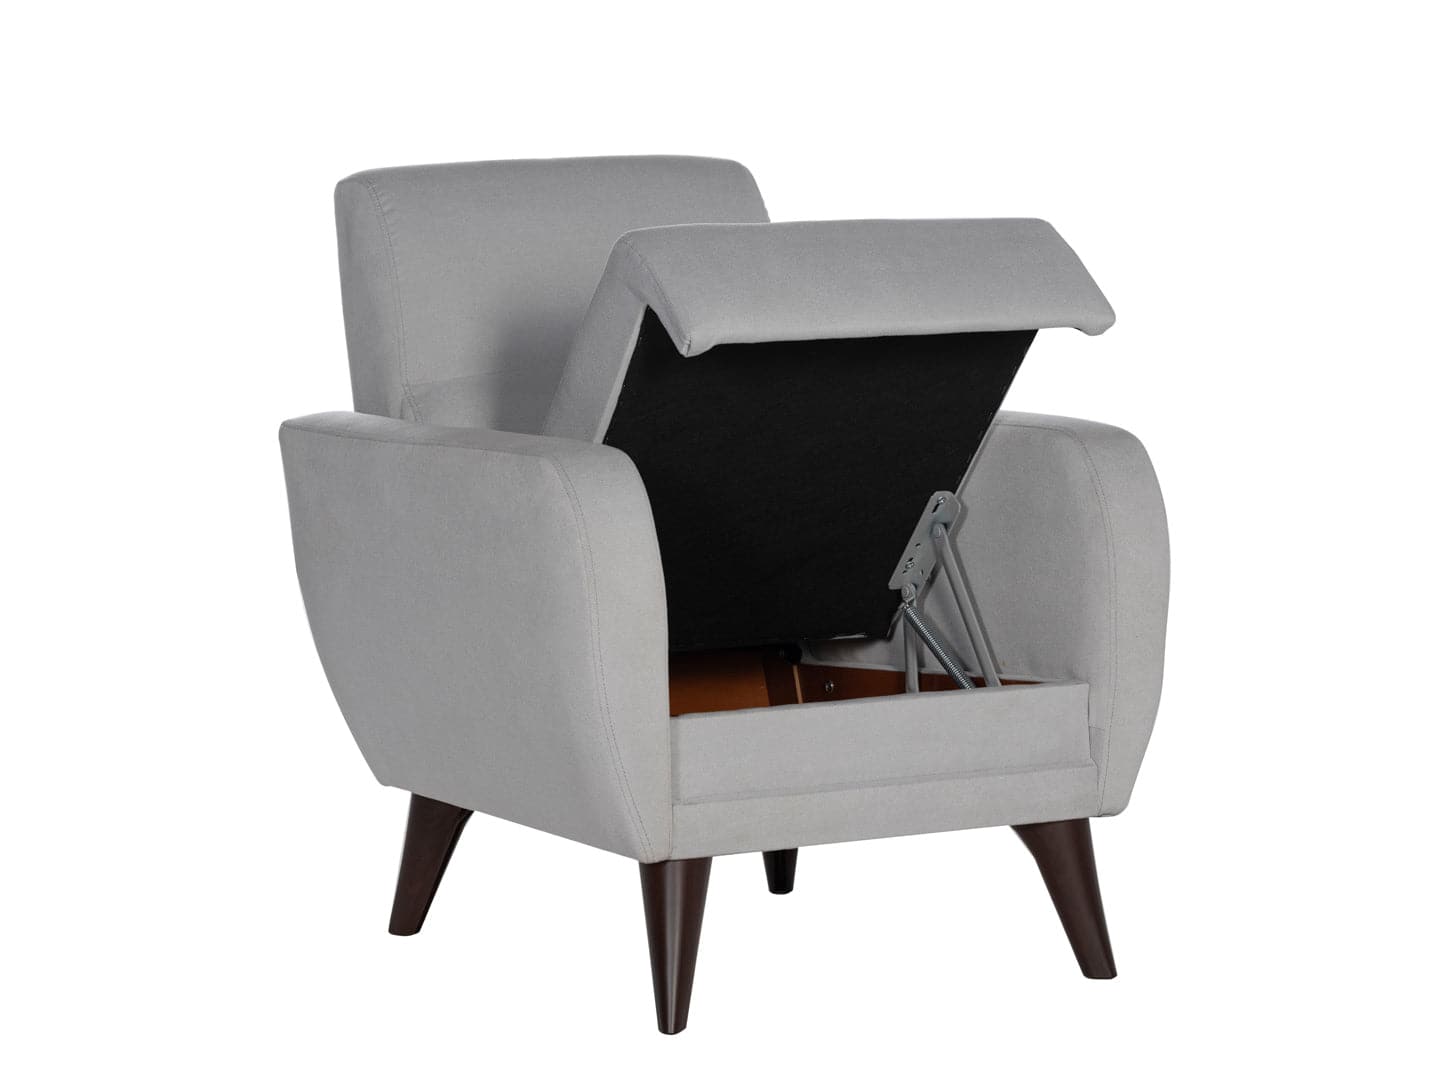 Chair In A Box-Flexy by Bellona